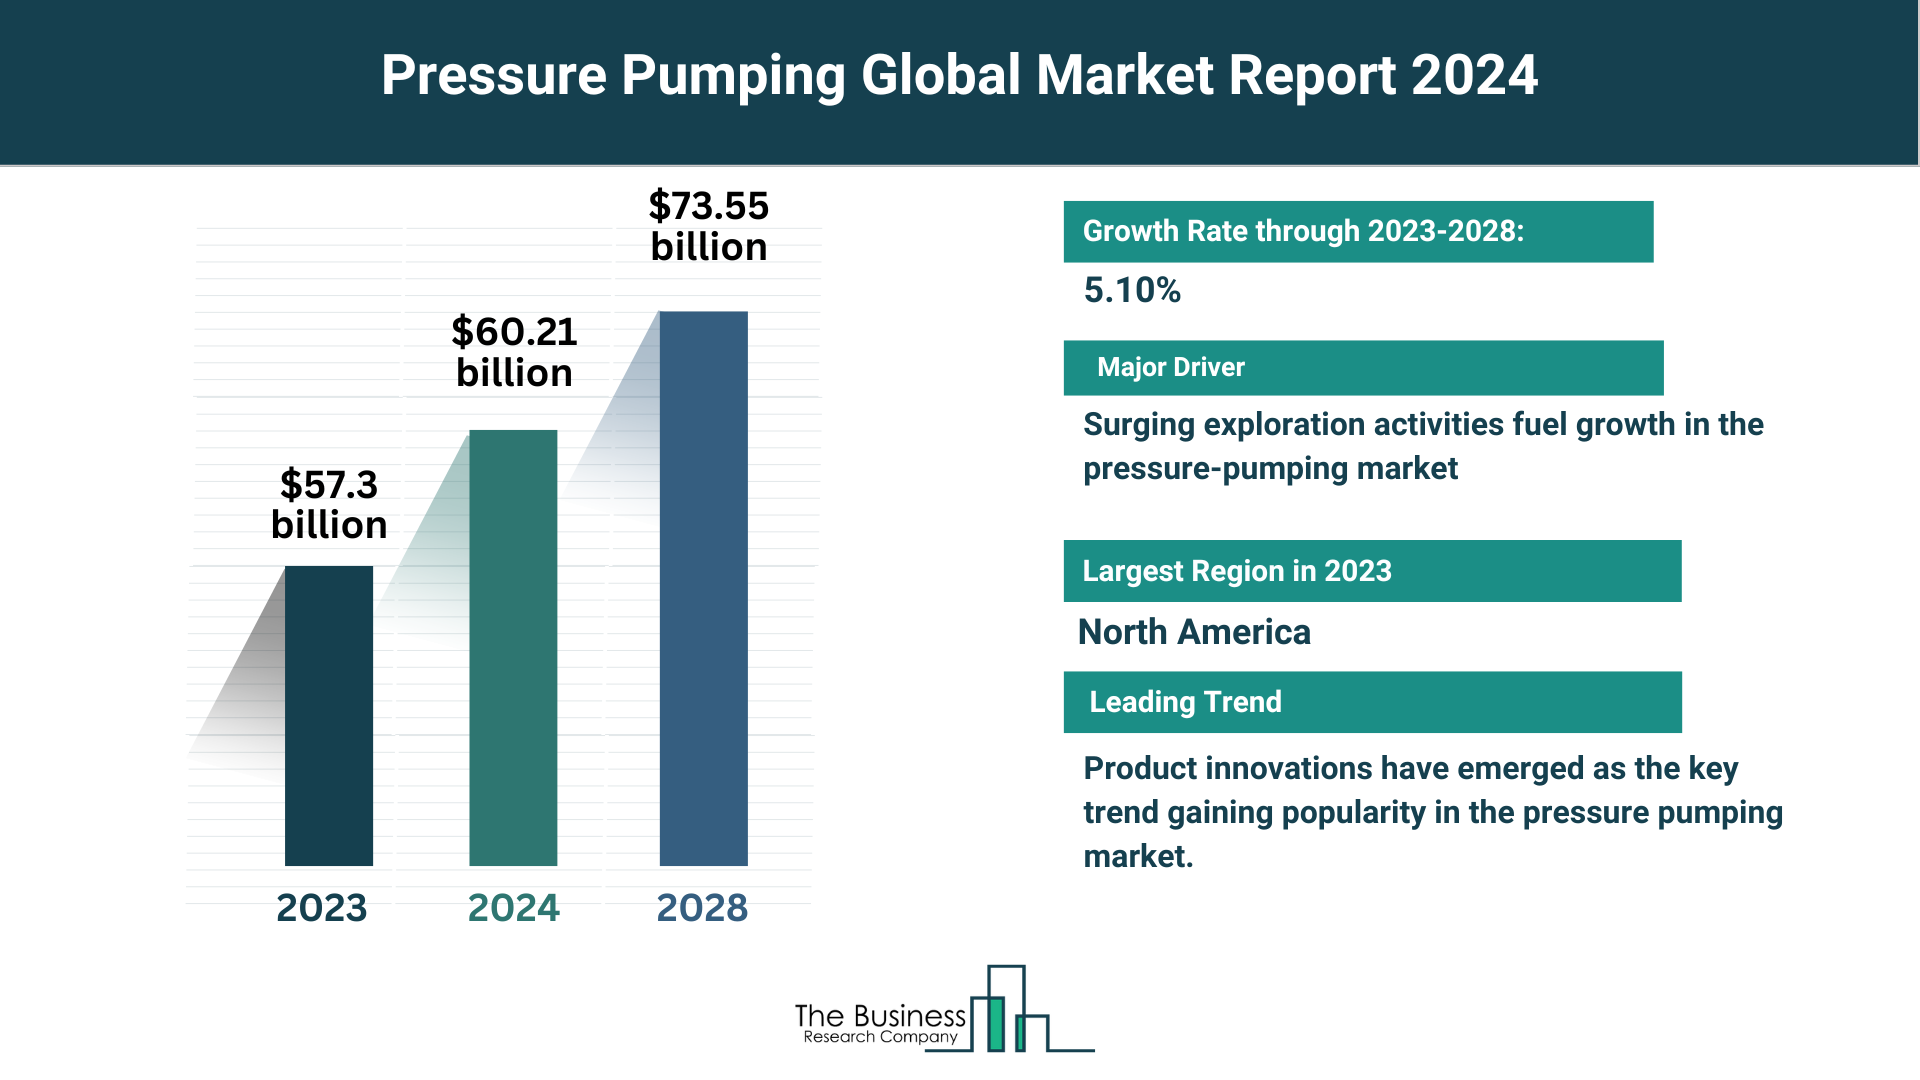 What Are The 5 Top Insights From The Pressure Pumping Market Forecast 2024